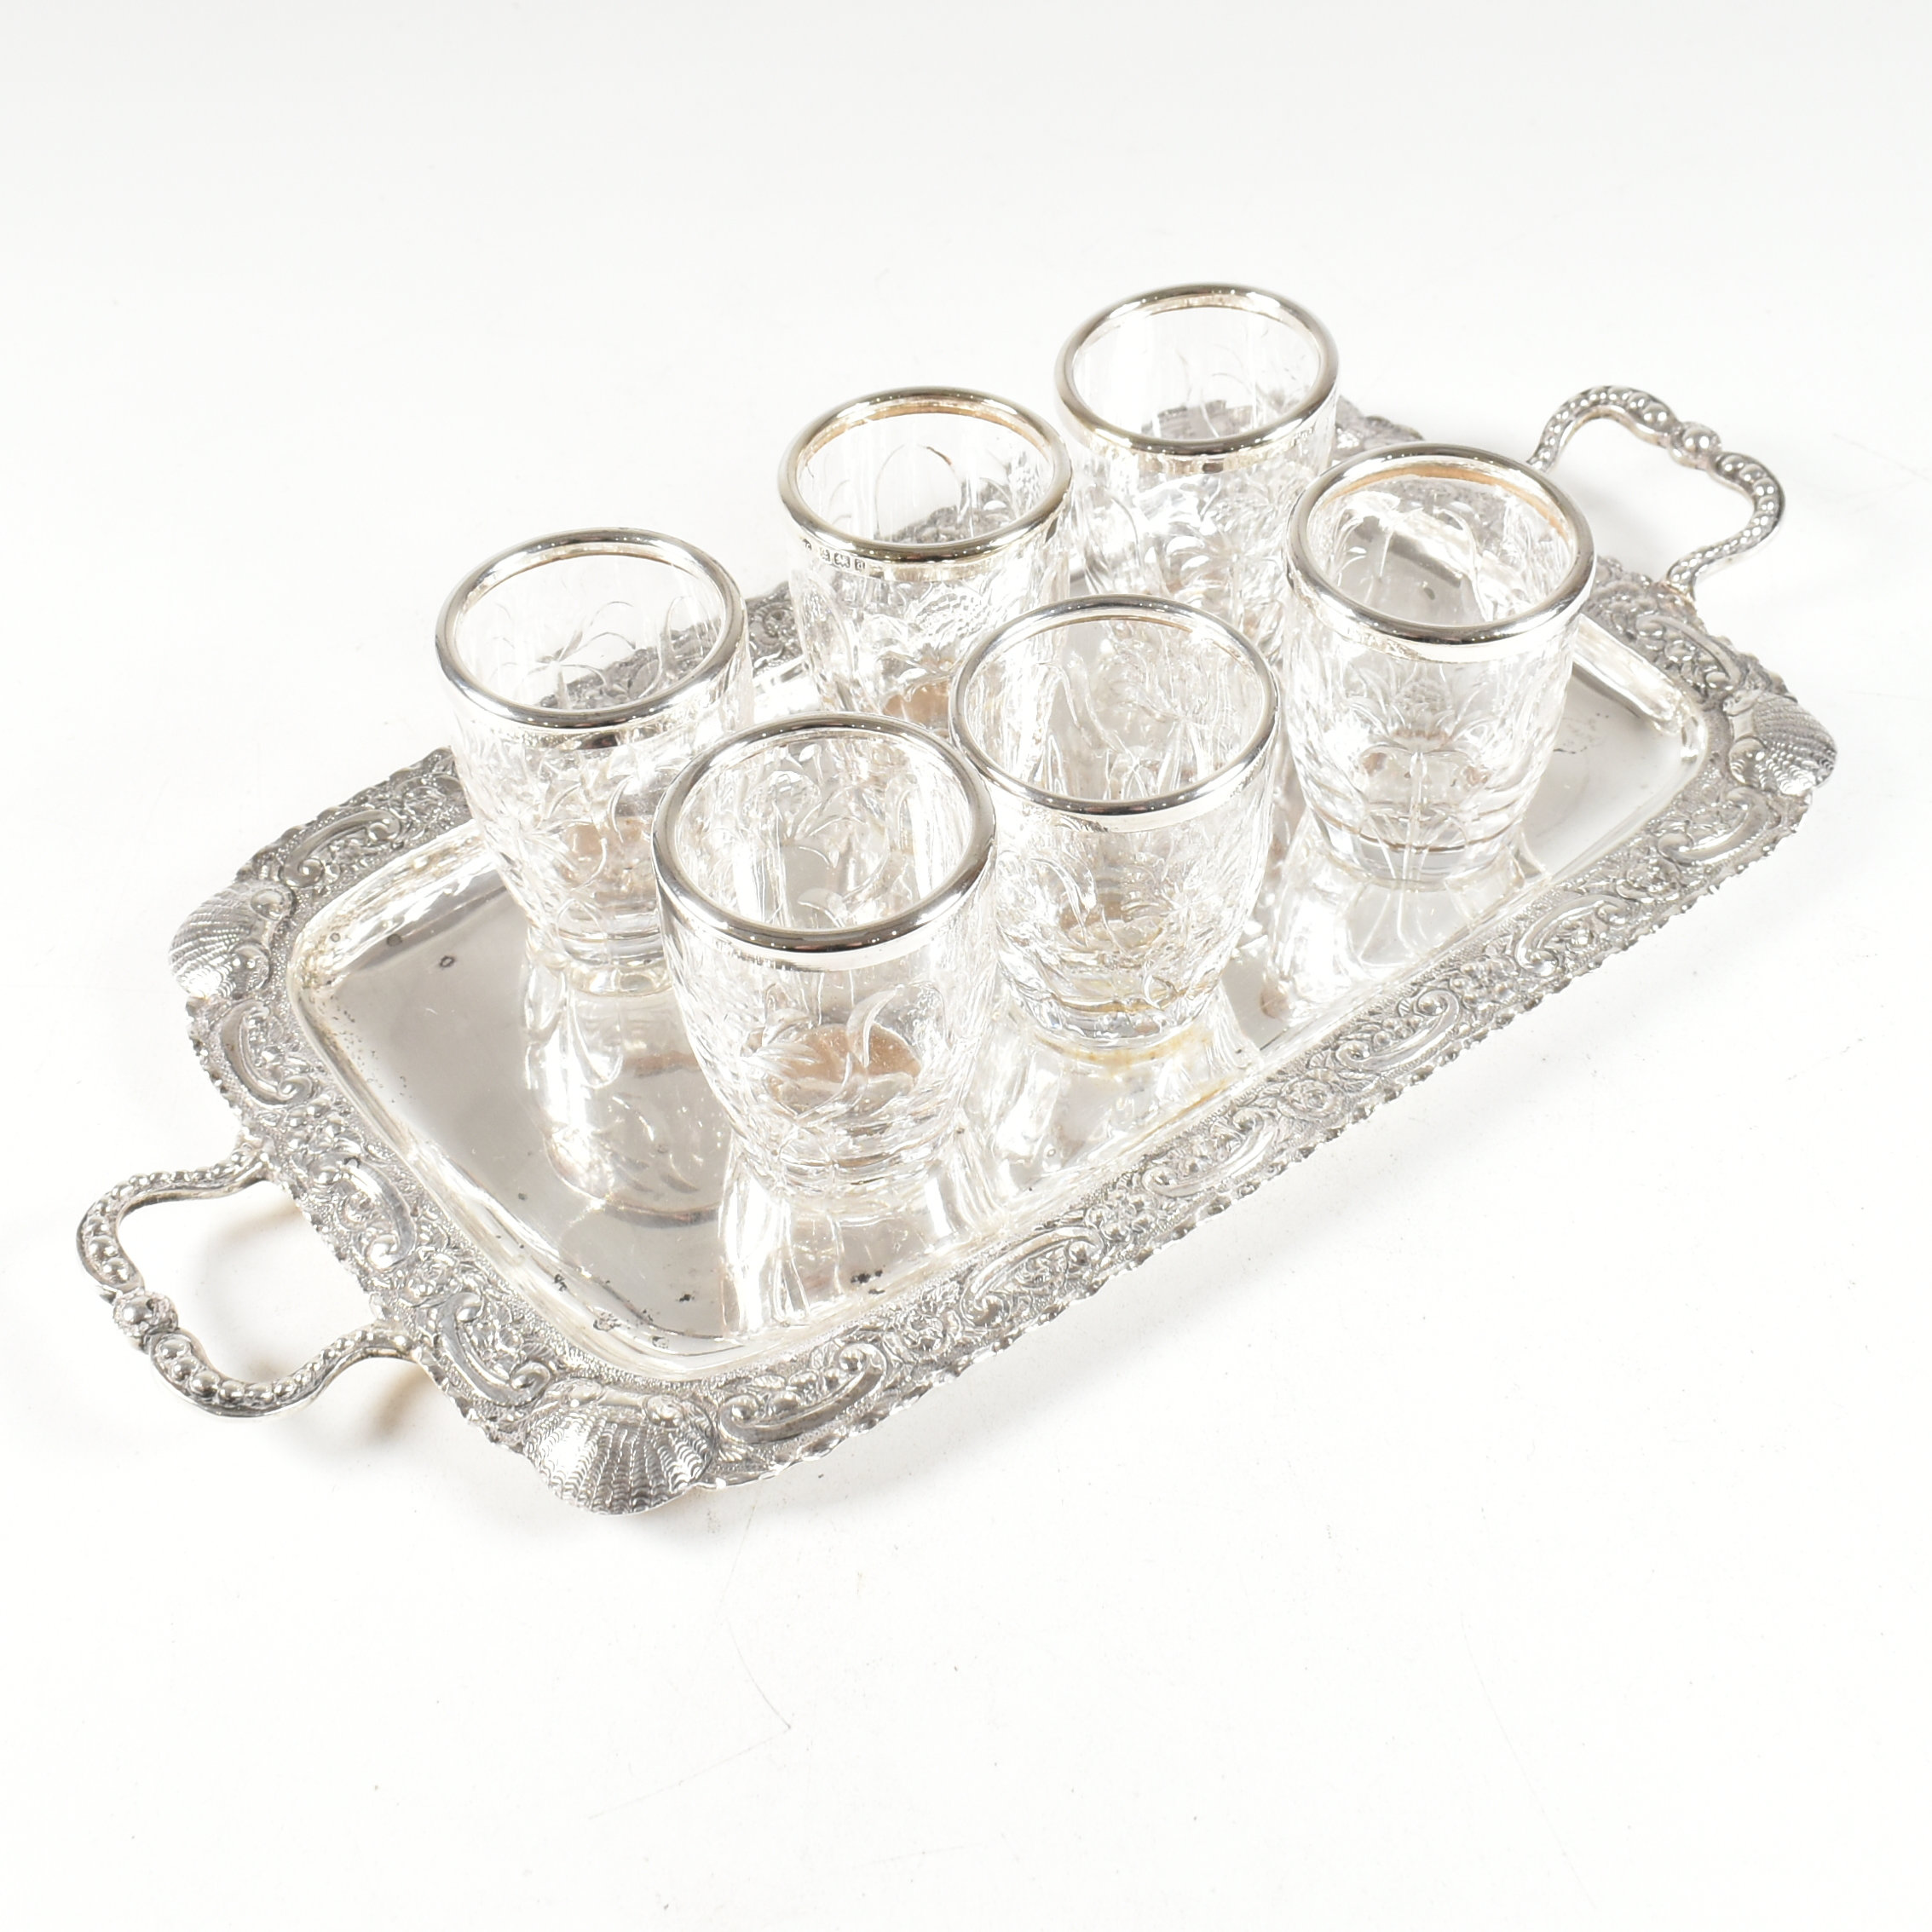 EDWARDIAN CASED SILVER MOUNTED TOT GLASS & TRAY SET - Image 4 of 15